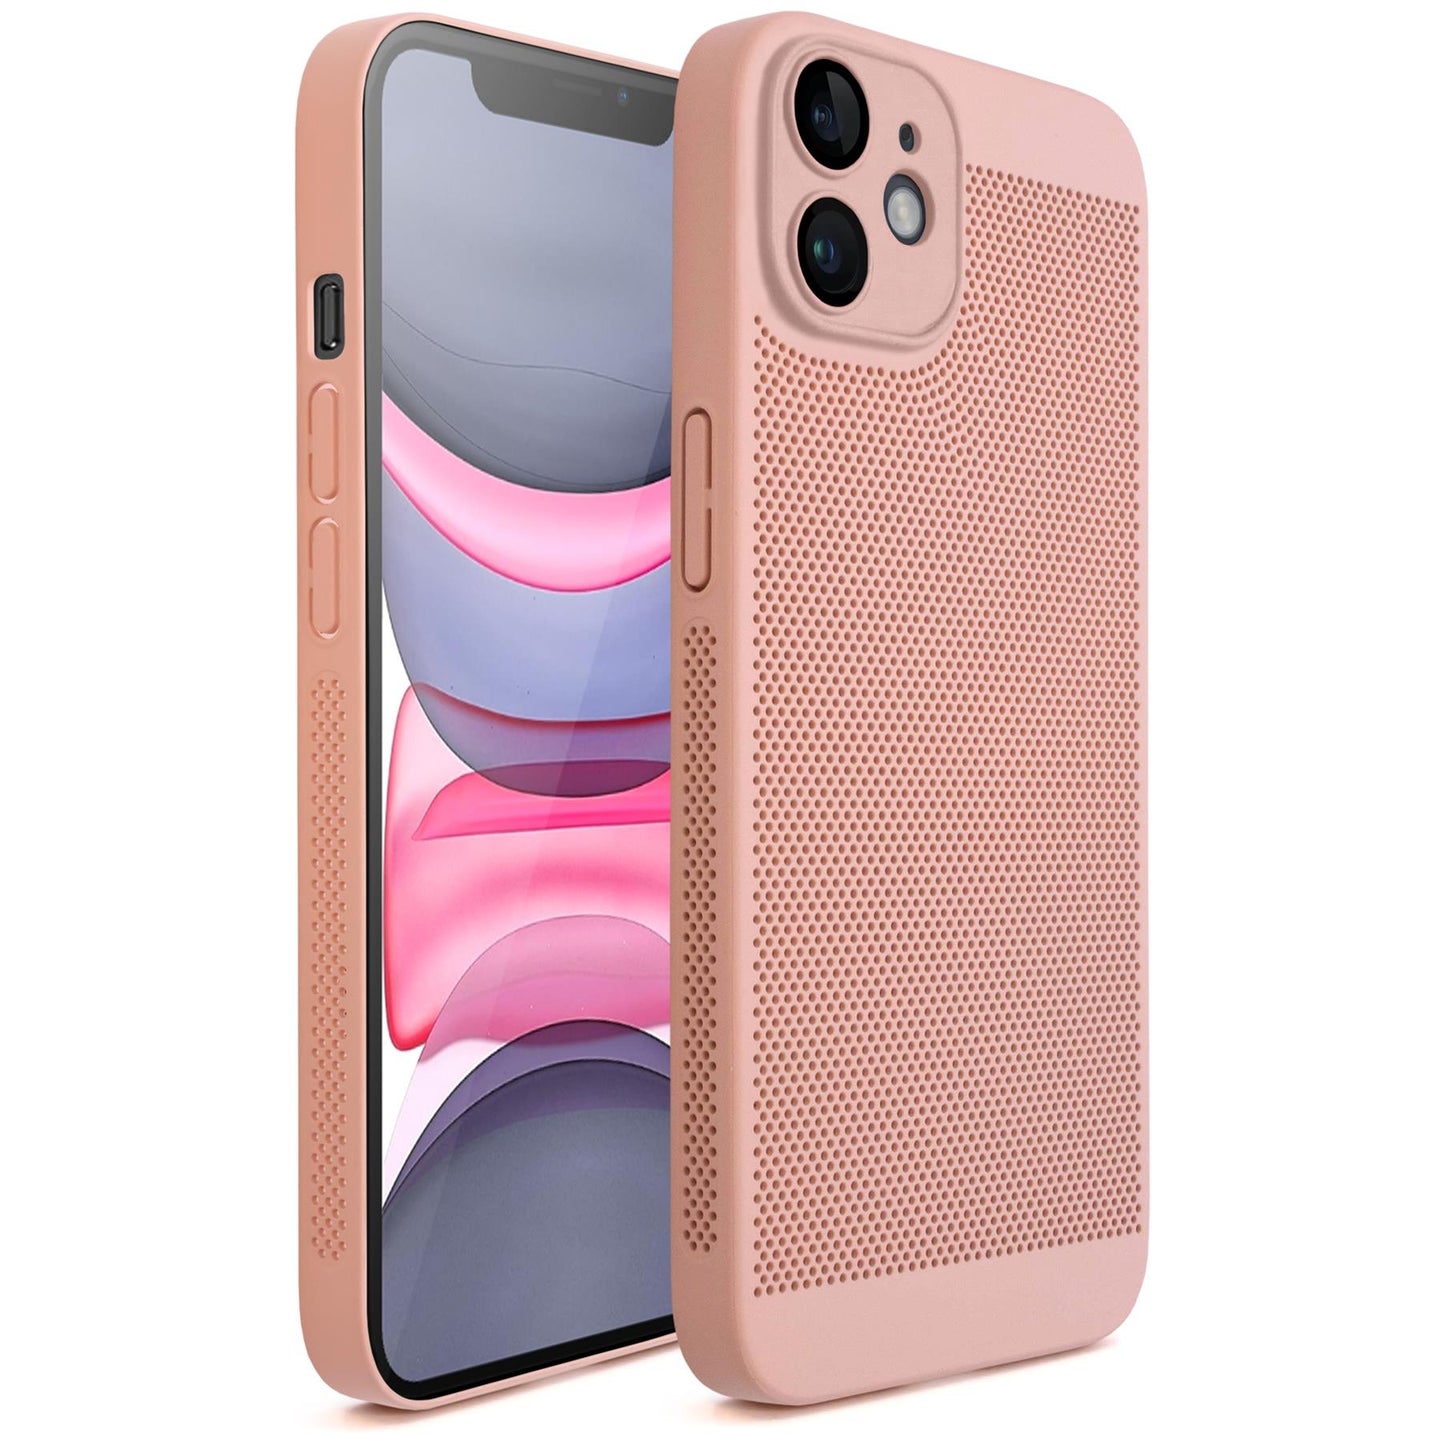 Moozy VentiGuard Phone Case for iPhone 11, Pastel Pink, 6.1-inch - Breathable Cover with Perforated Pattern for Air Circulation, Ventilation, Anti-Overheating Phone Case